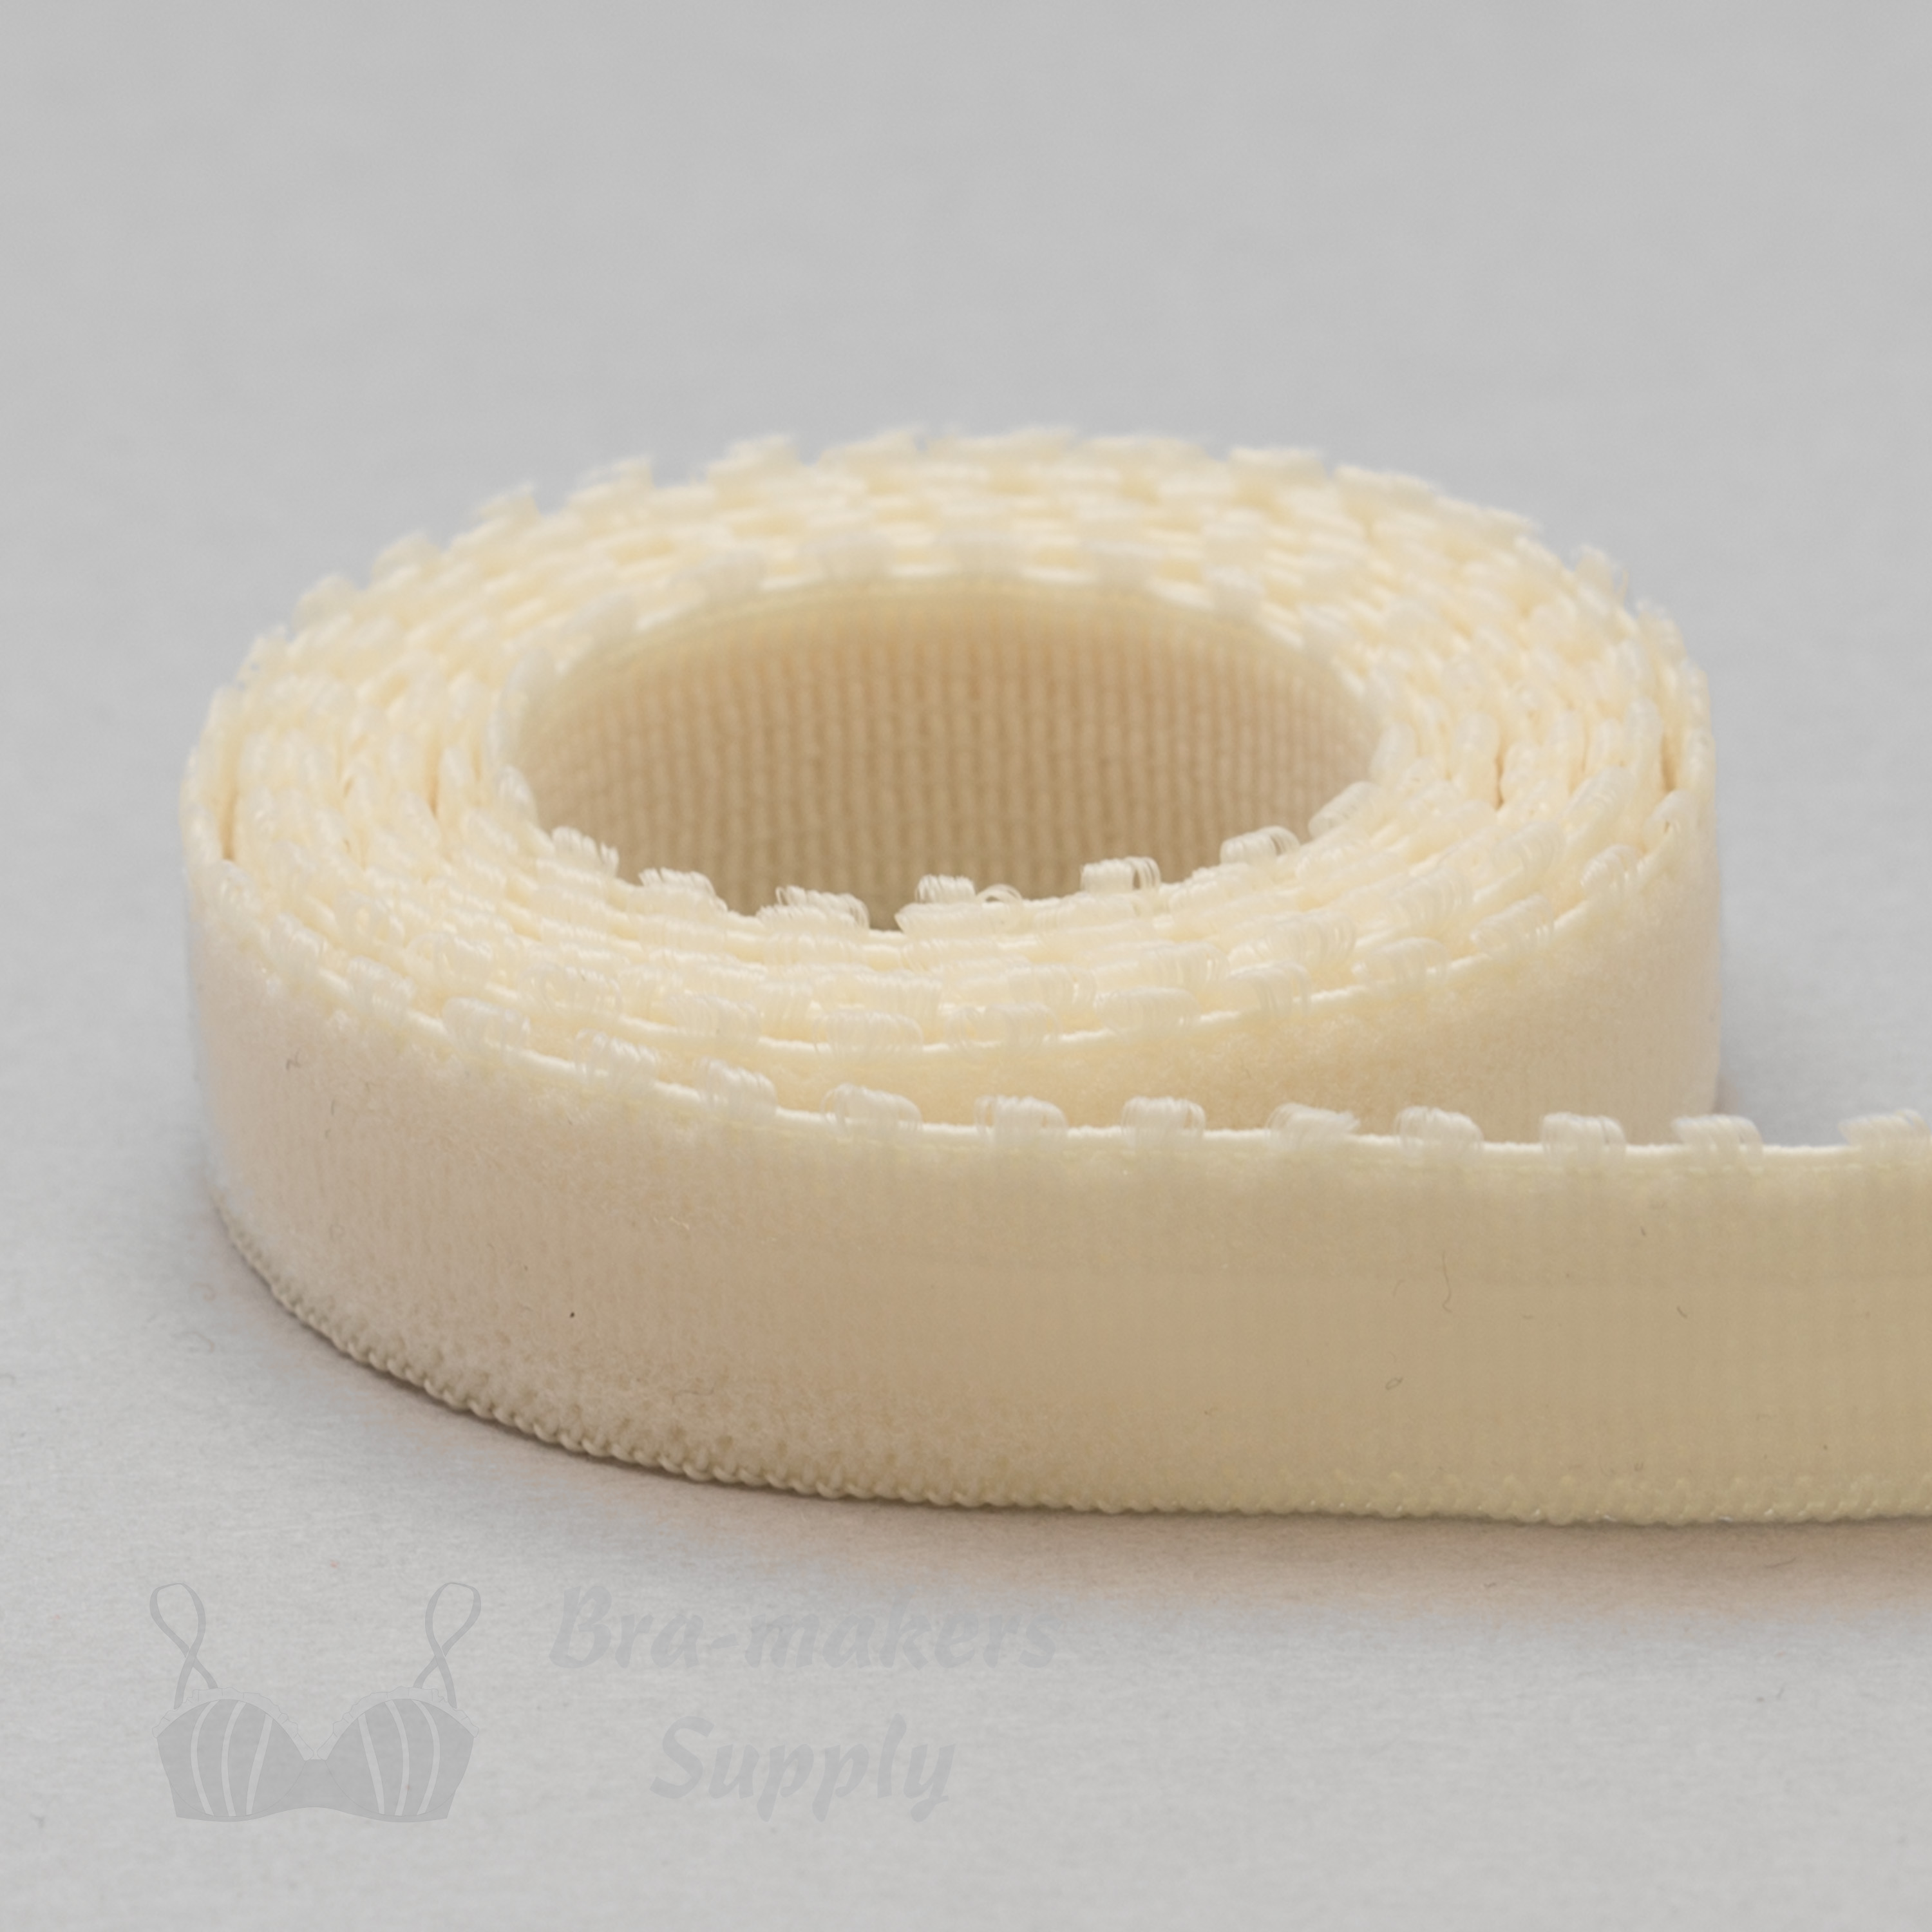 half inch or 12 mm silicone gripper elastic EG-4 ivory from Bra-Makers Supply Hamilton 1 metre roll shown